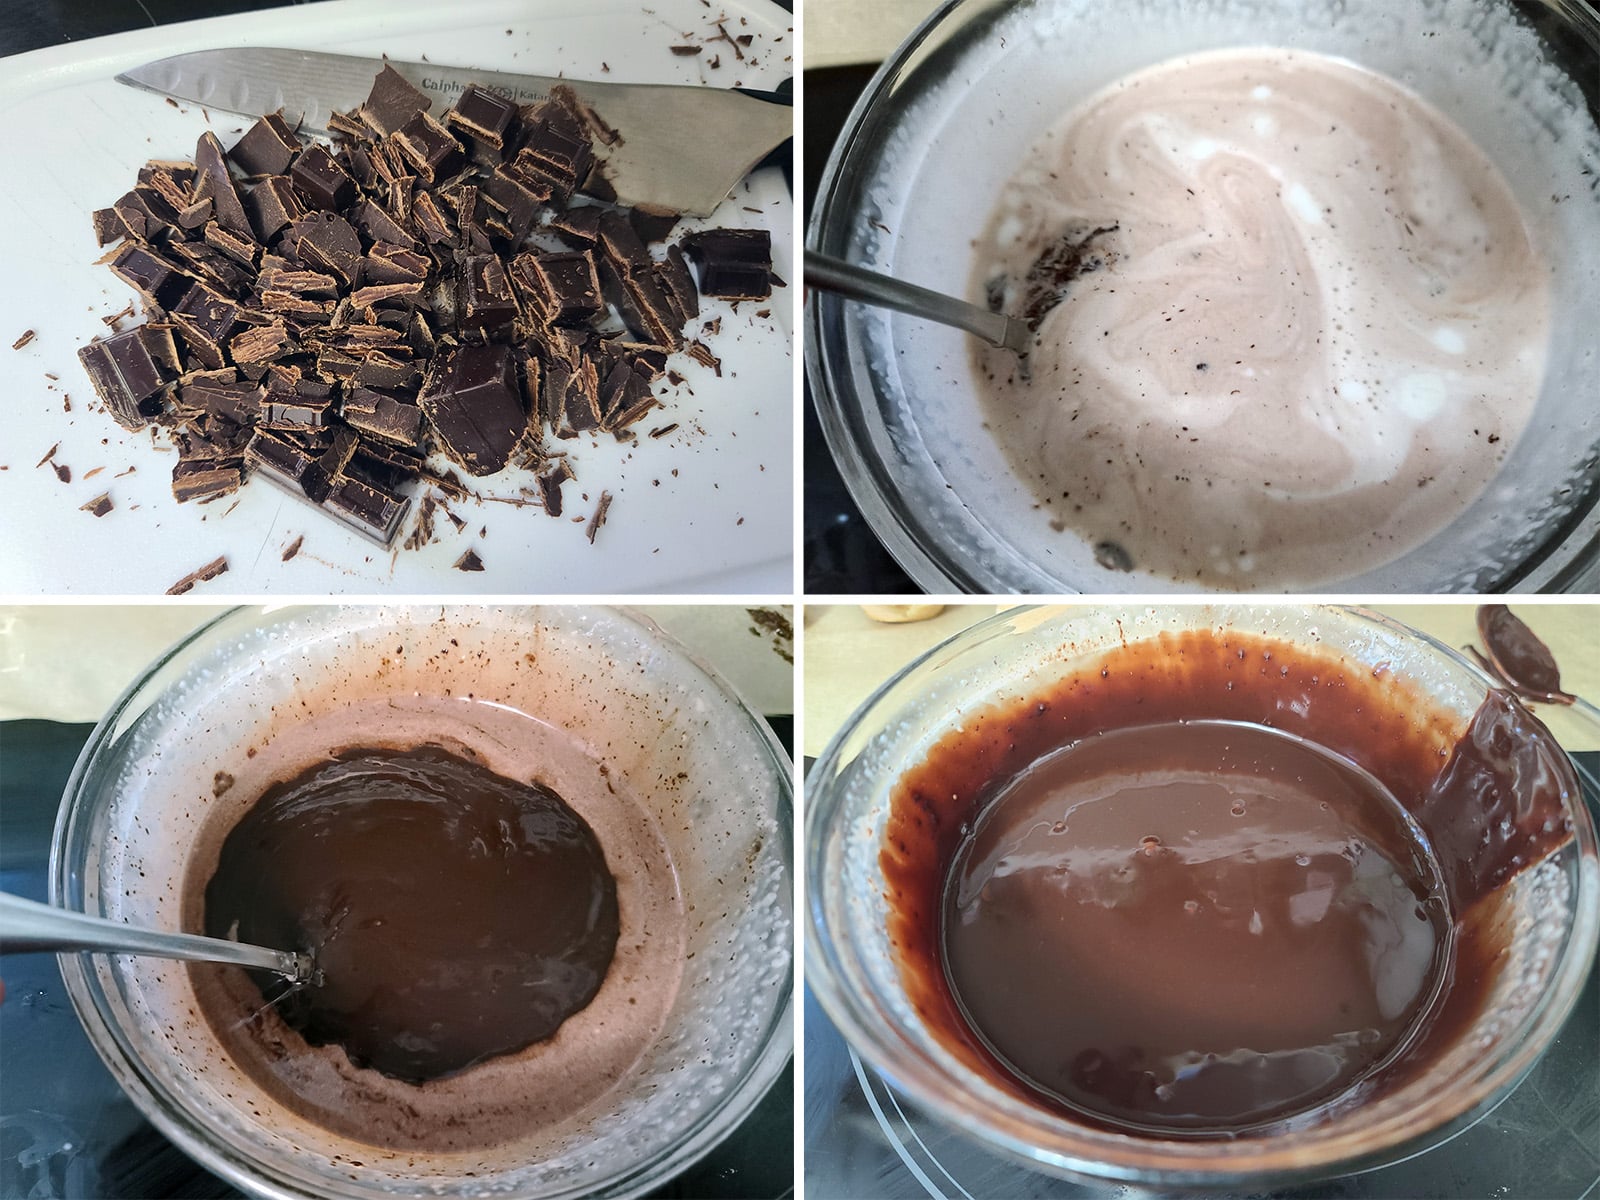 A 4 part image showing the chocolate glaze being made.